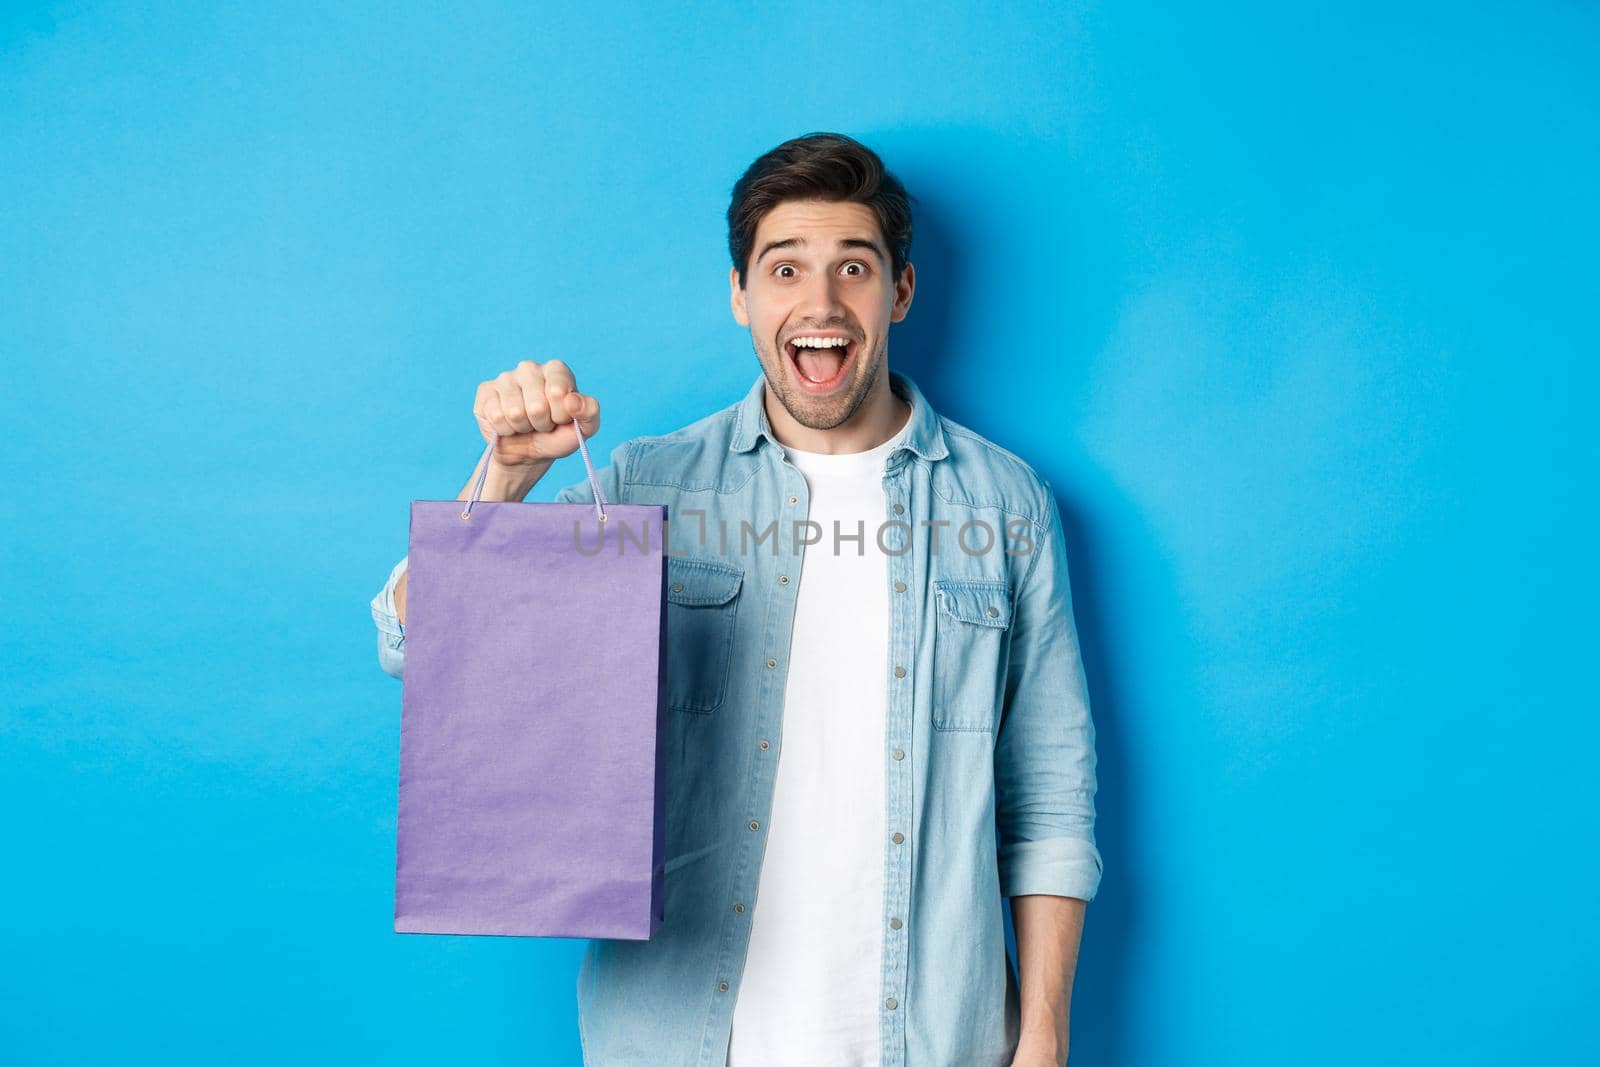 Concept of shopping, holidays and lifestyle. Excited handsome guy holding paper bag with gift and looking happy, standing over blue background.